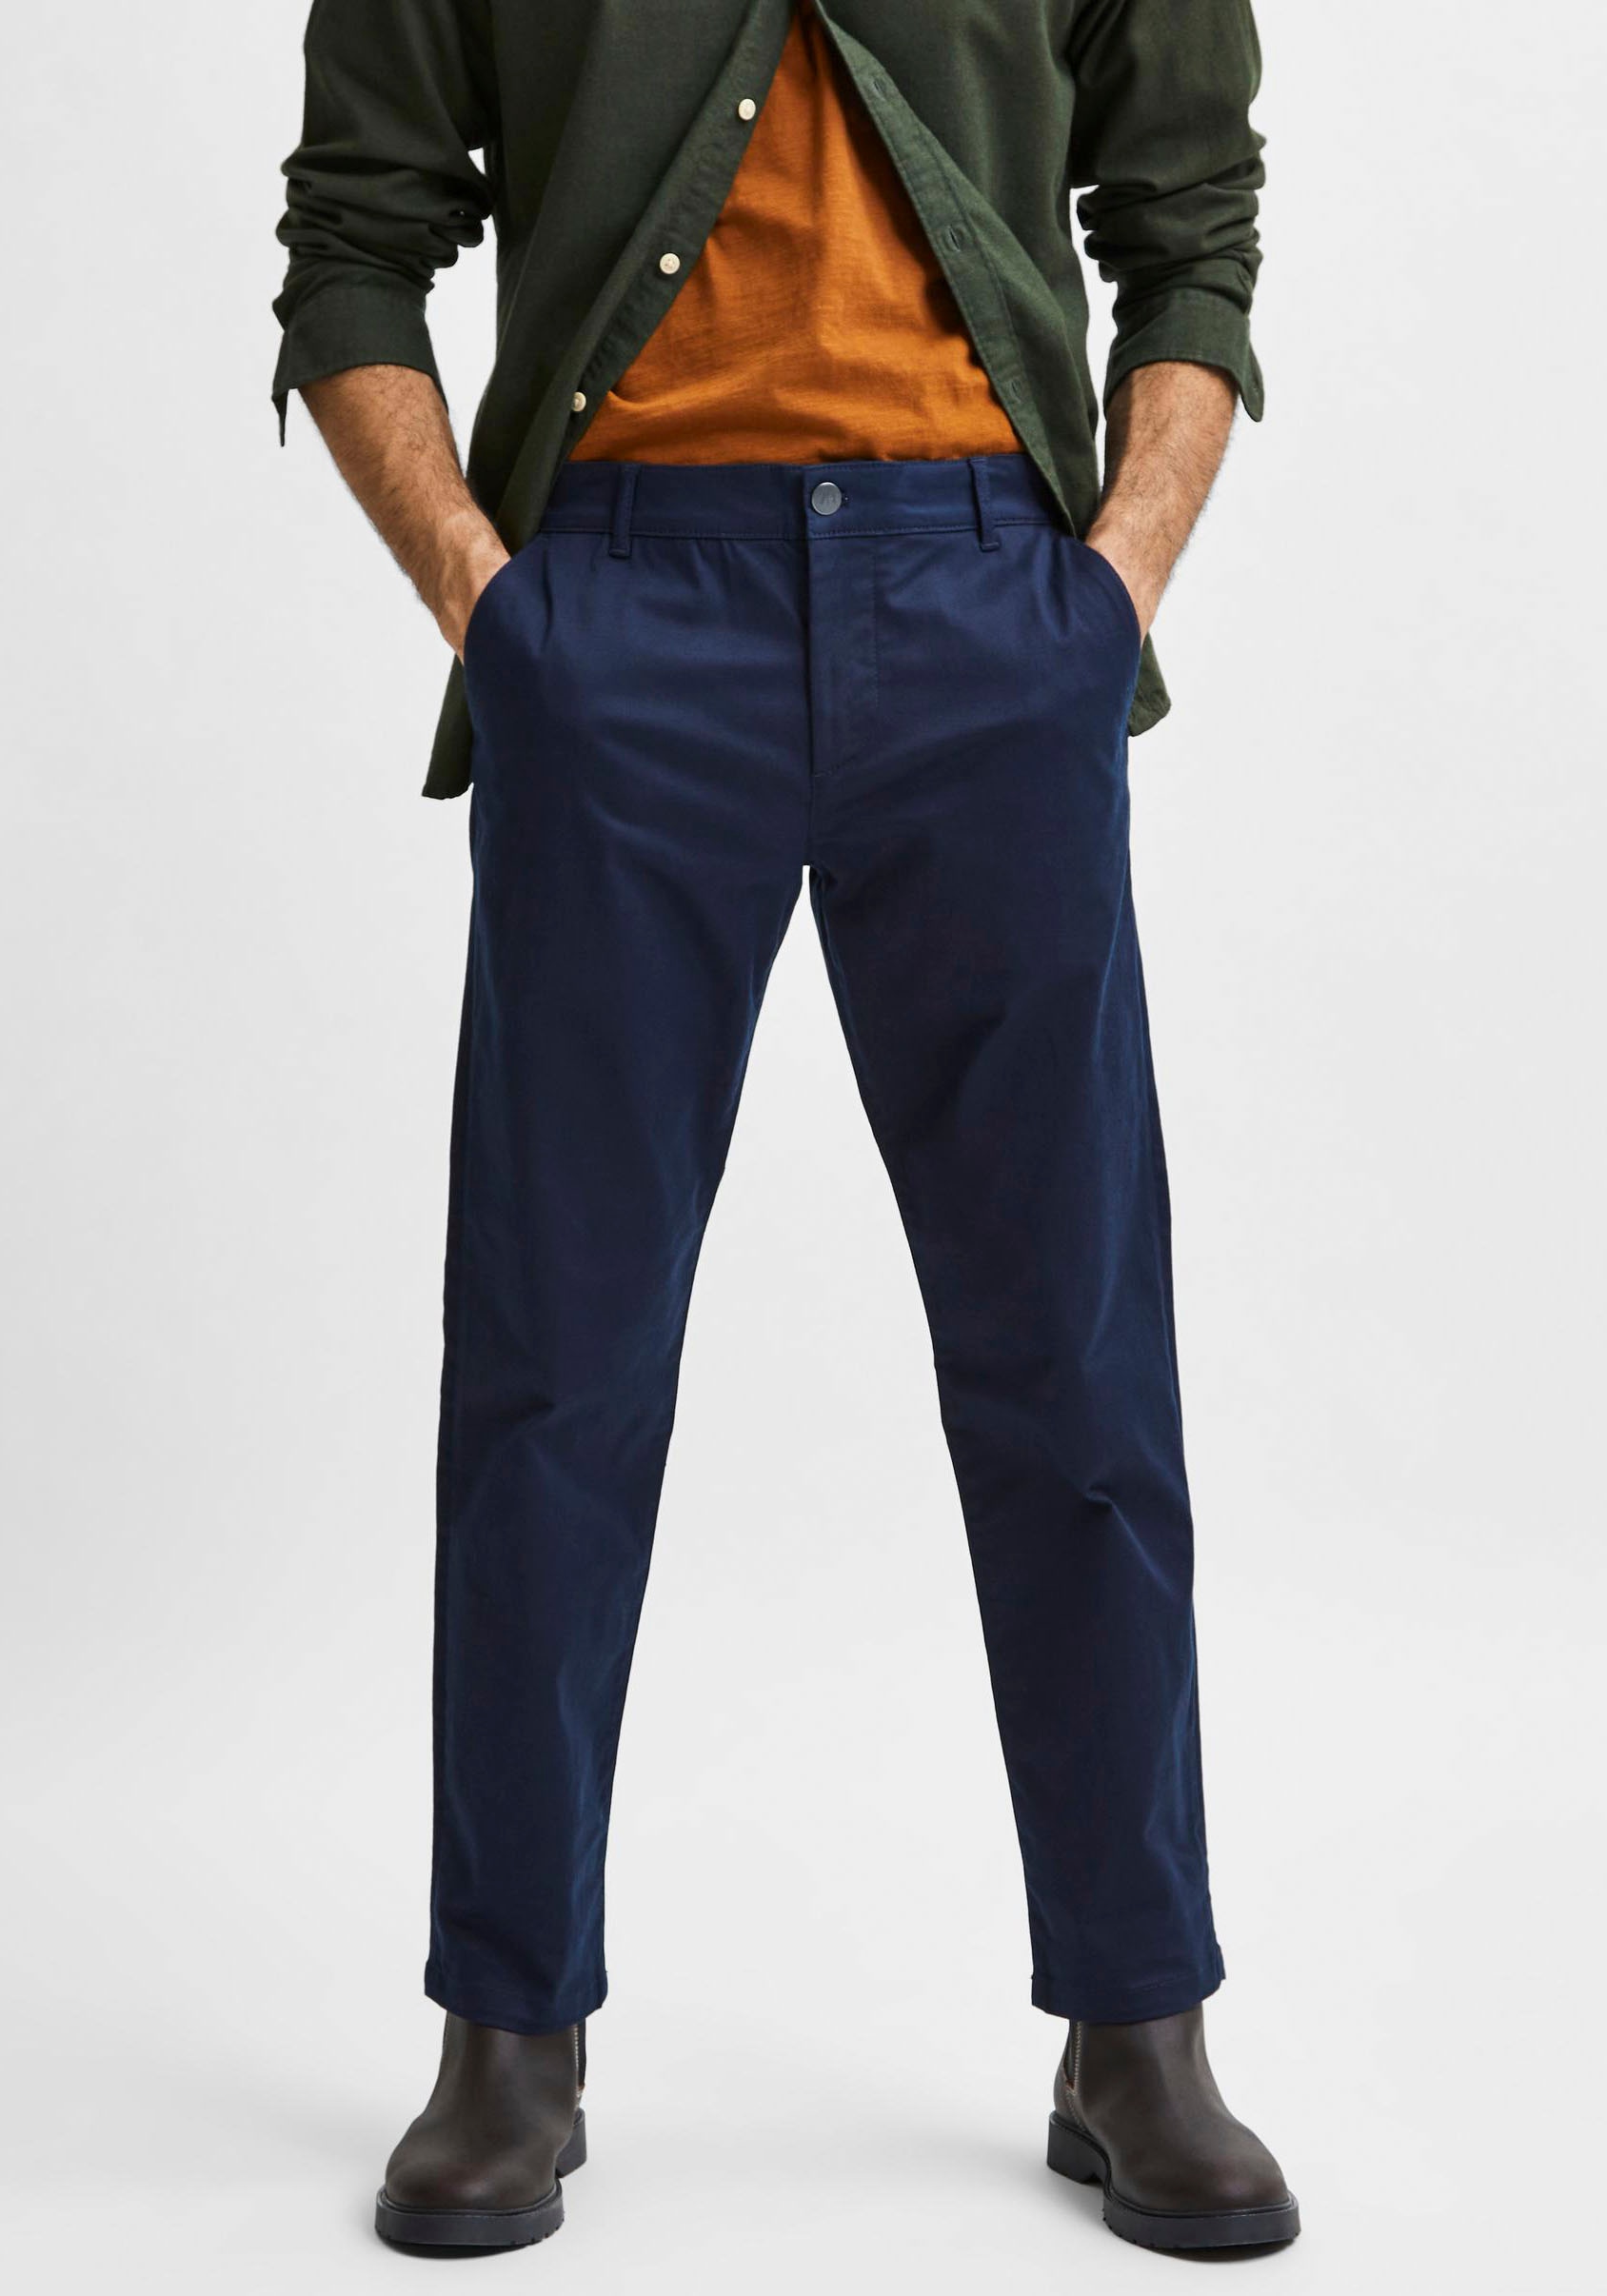 im »SE bestellen SELECTED Chinohose HOMME Online-Shop Chino«